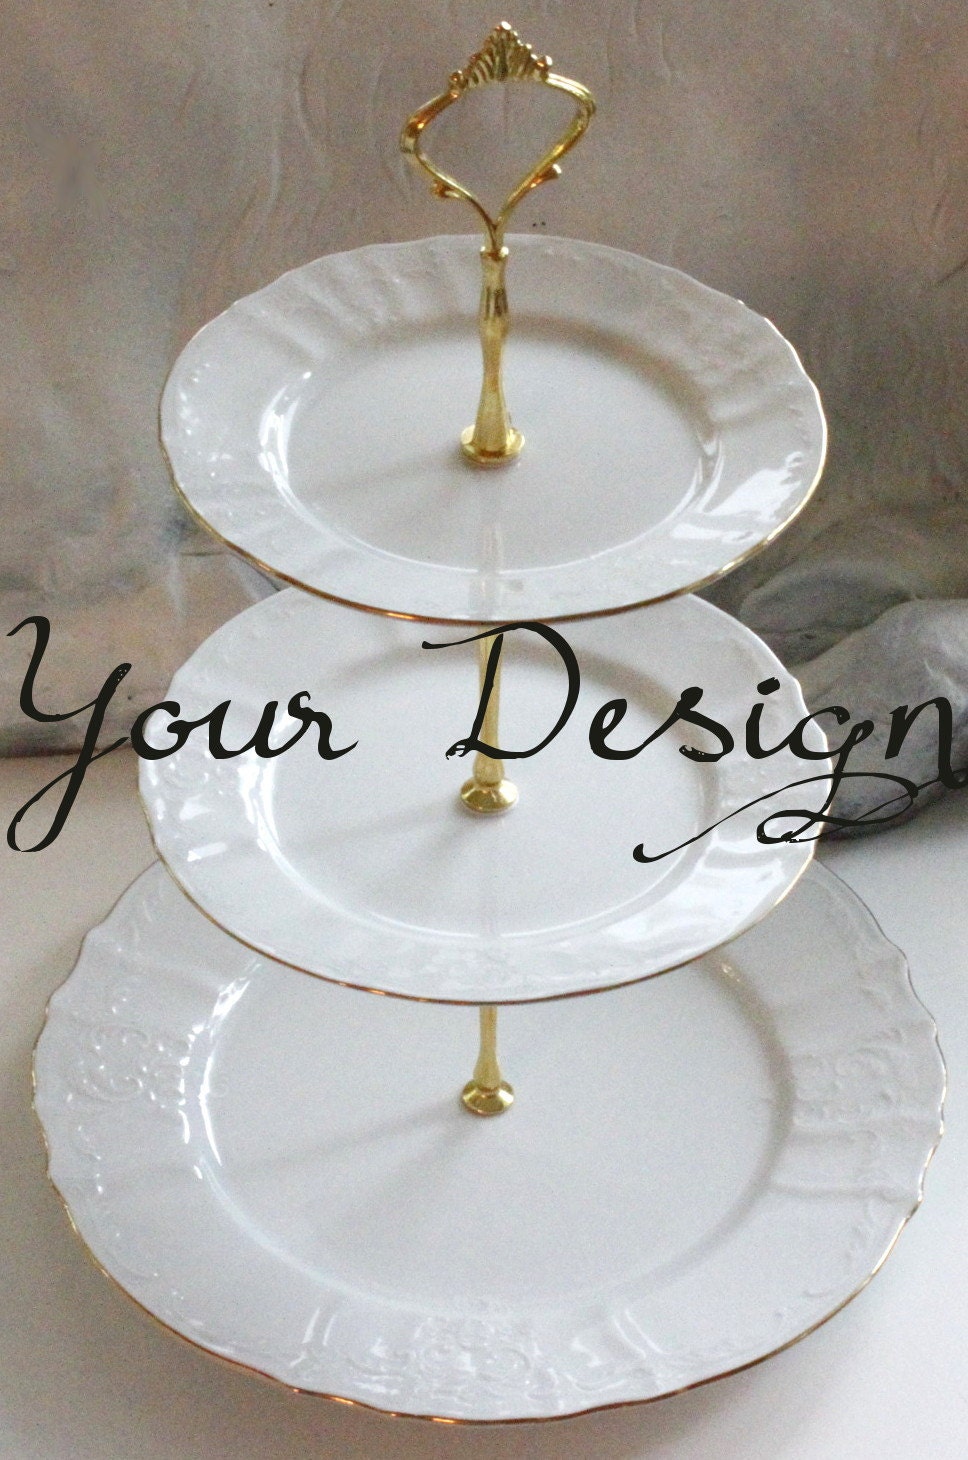 100 Splendid DIY Cake Stand Ideas to Make Your Baked Creations Shine